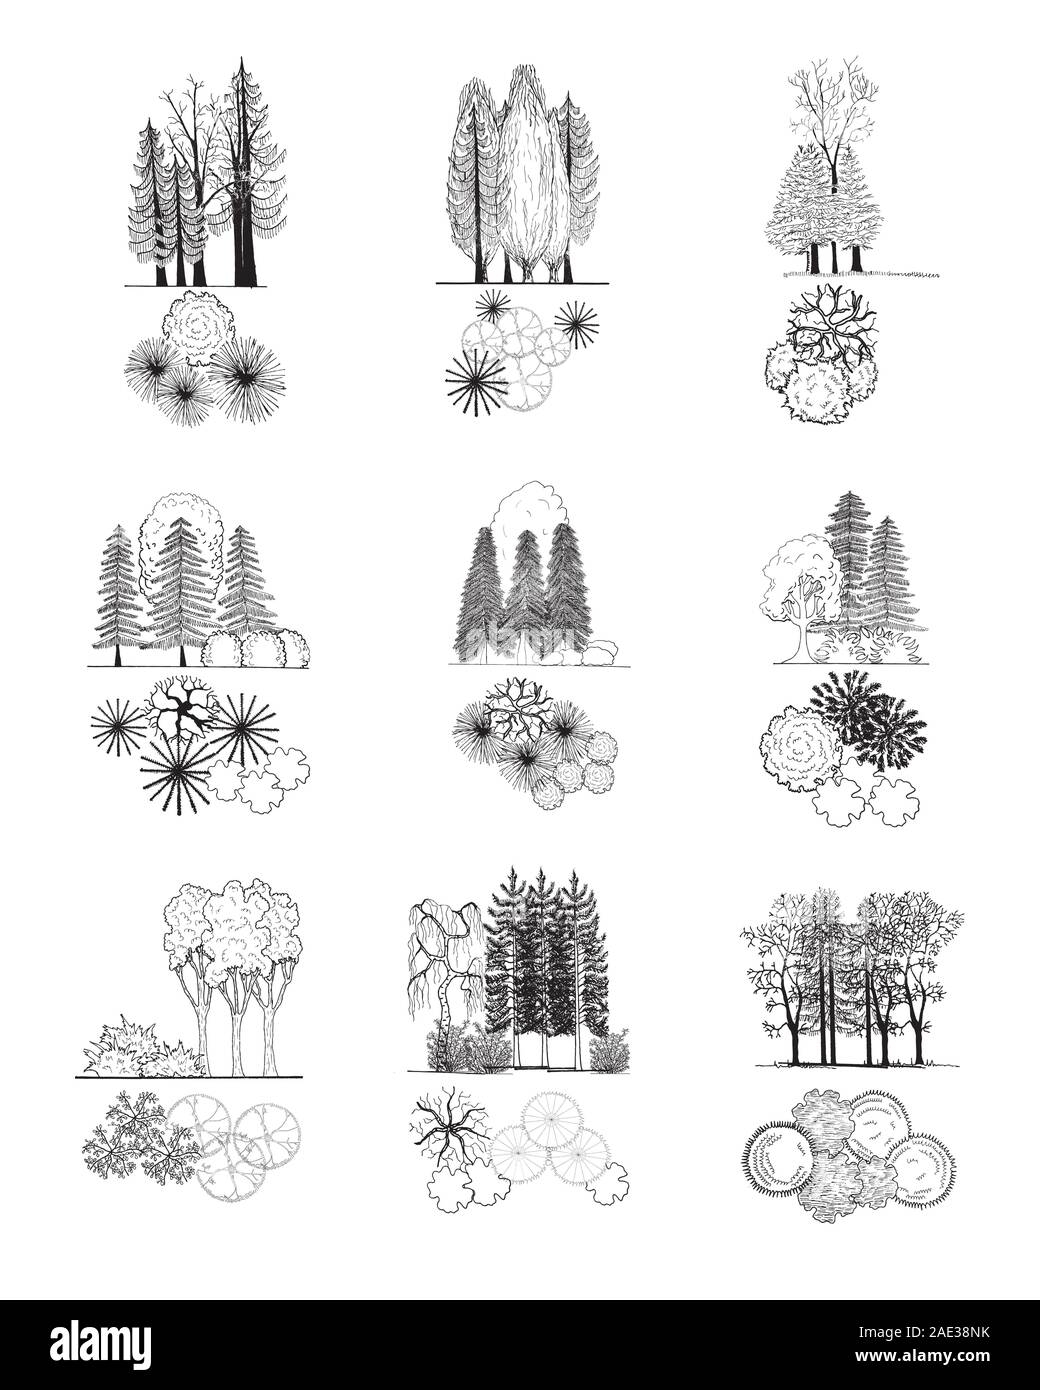 Tree and treetop symbols, vector set for architectural or landscape design Stock Vector